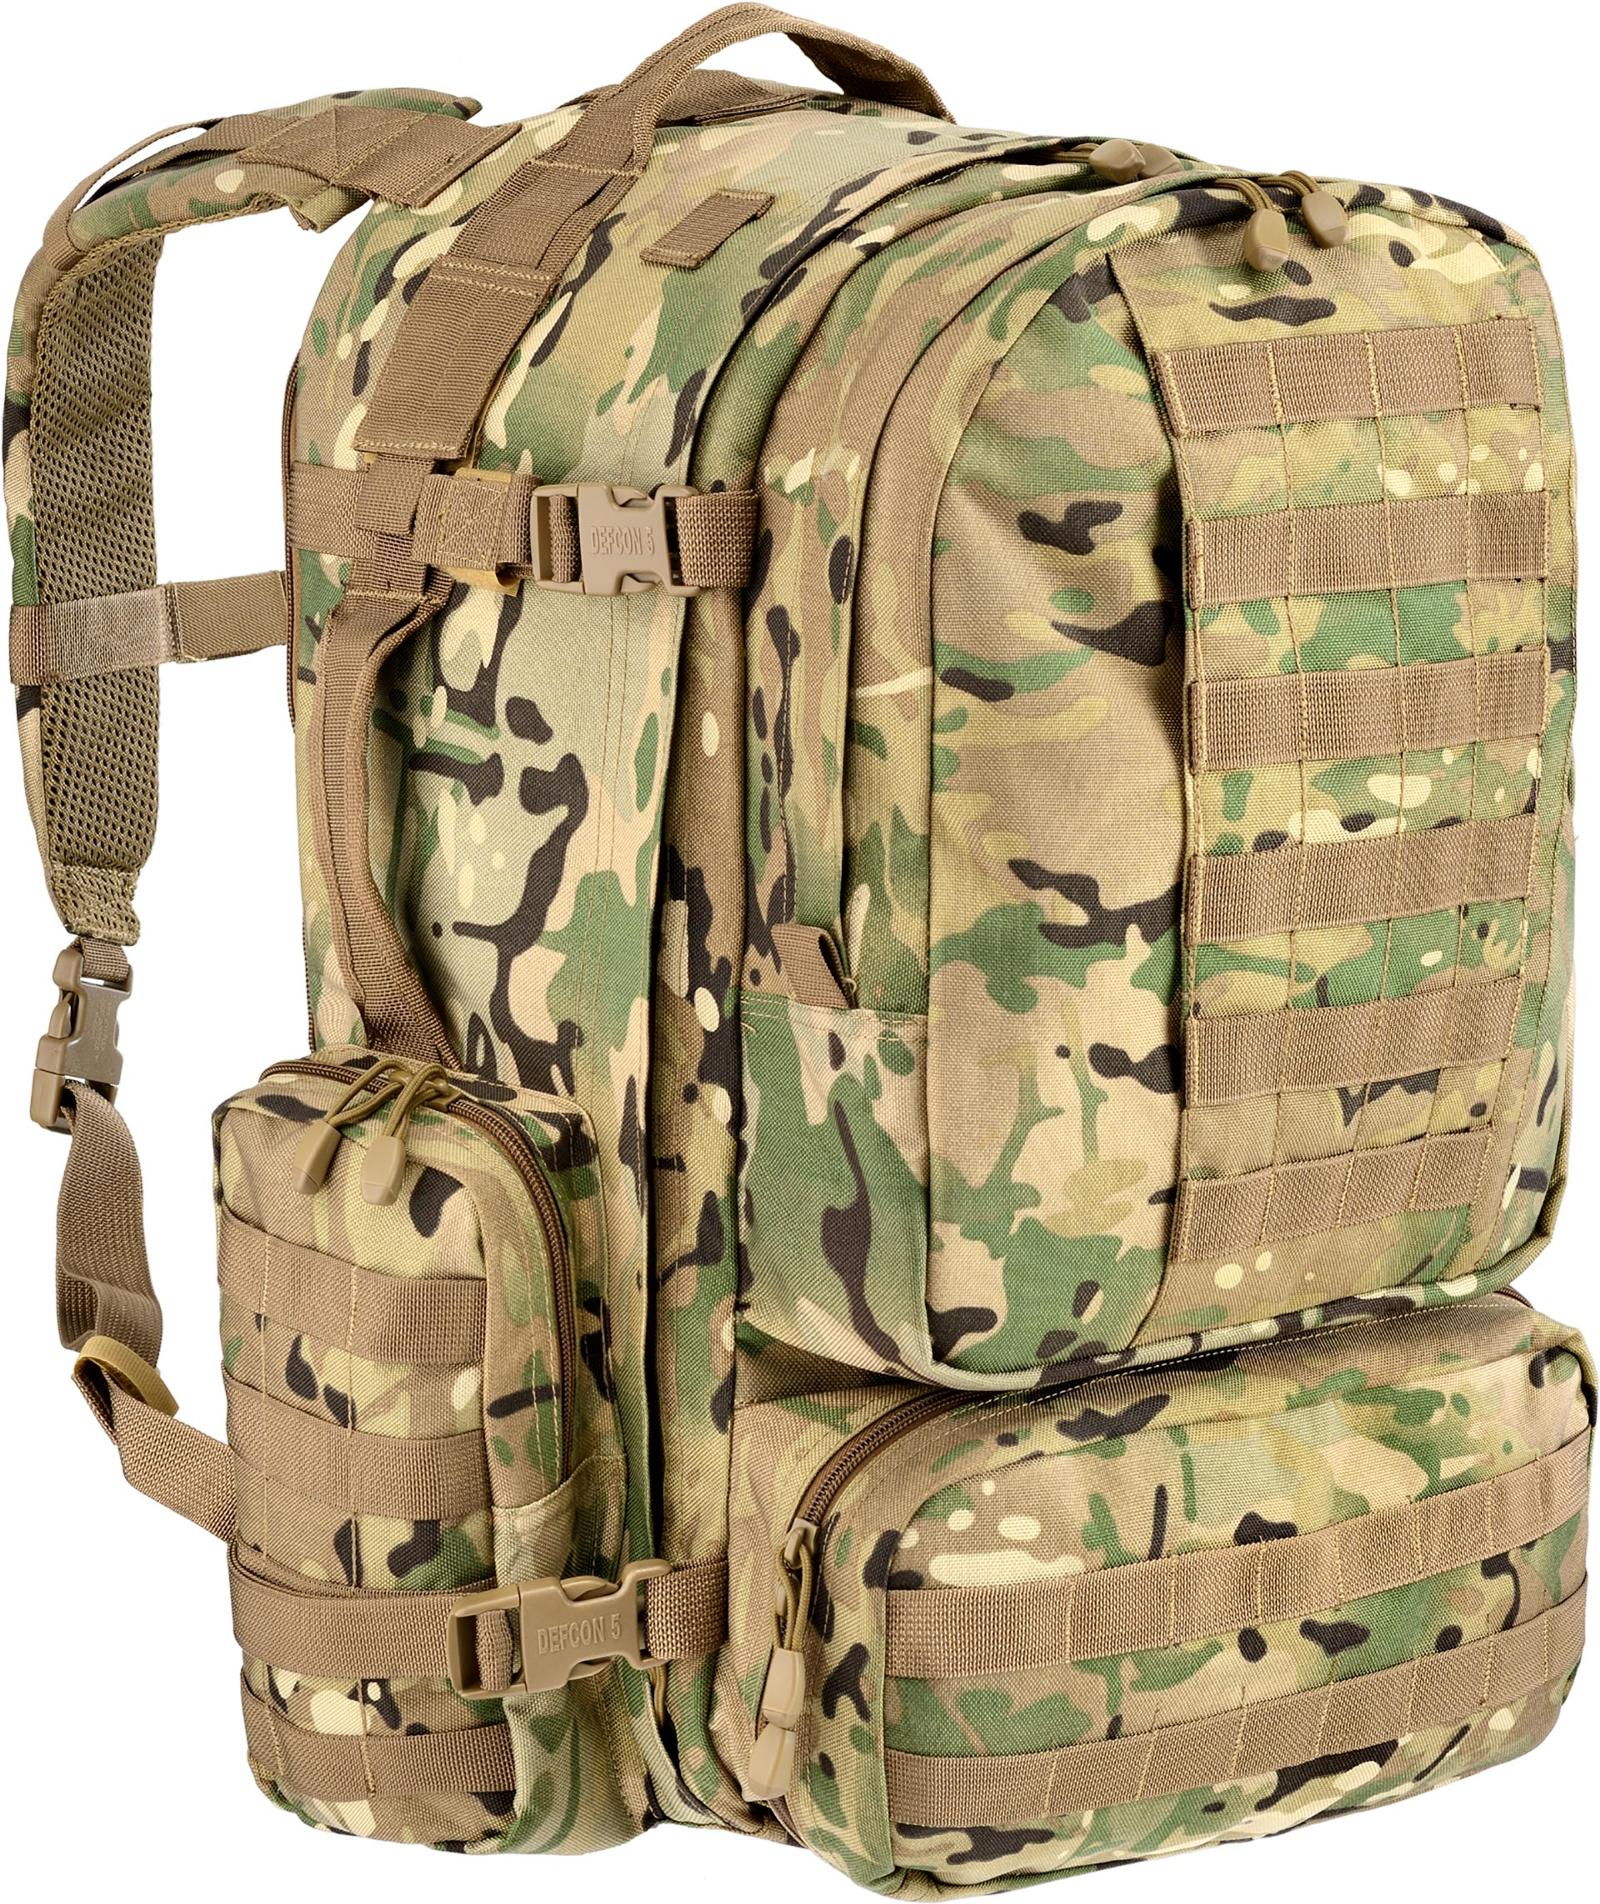 DEFCON 5 MODULAR BACKPACK - D5-S100022 - Bags and Backpacks 